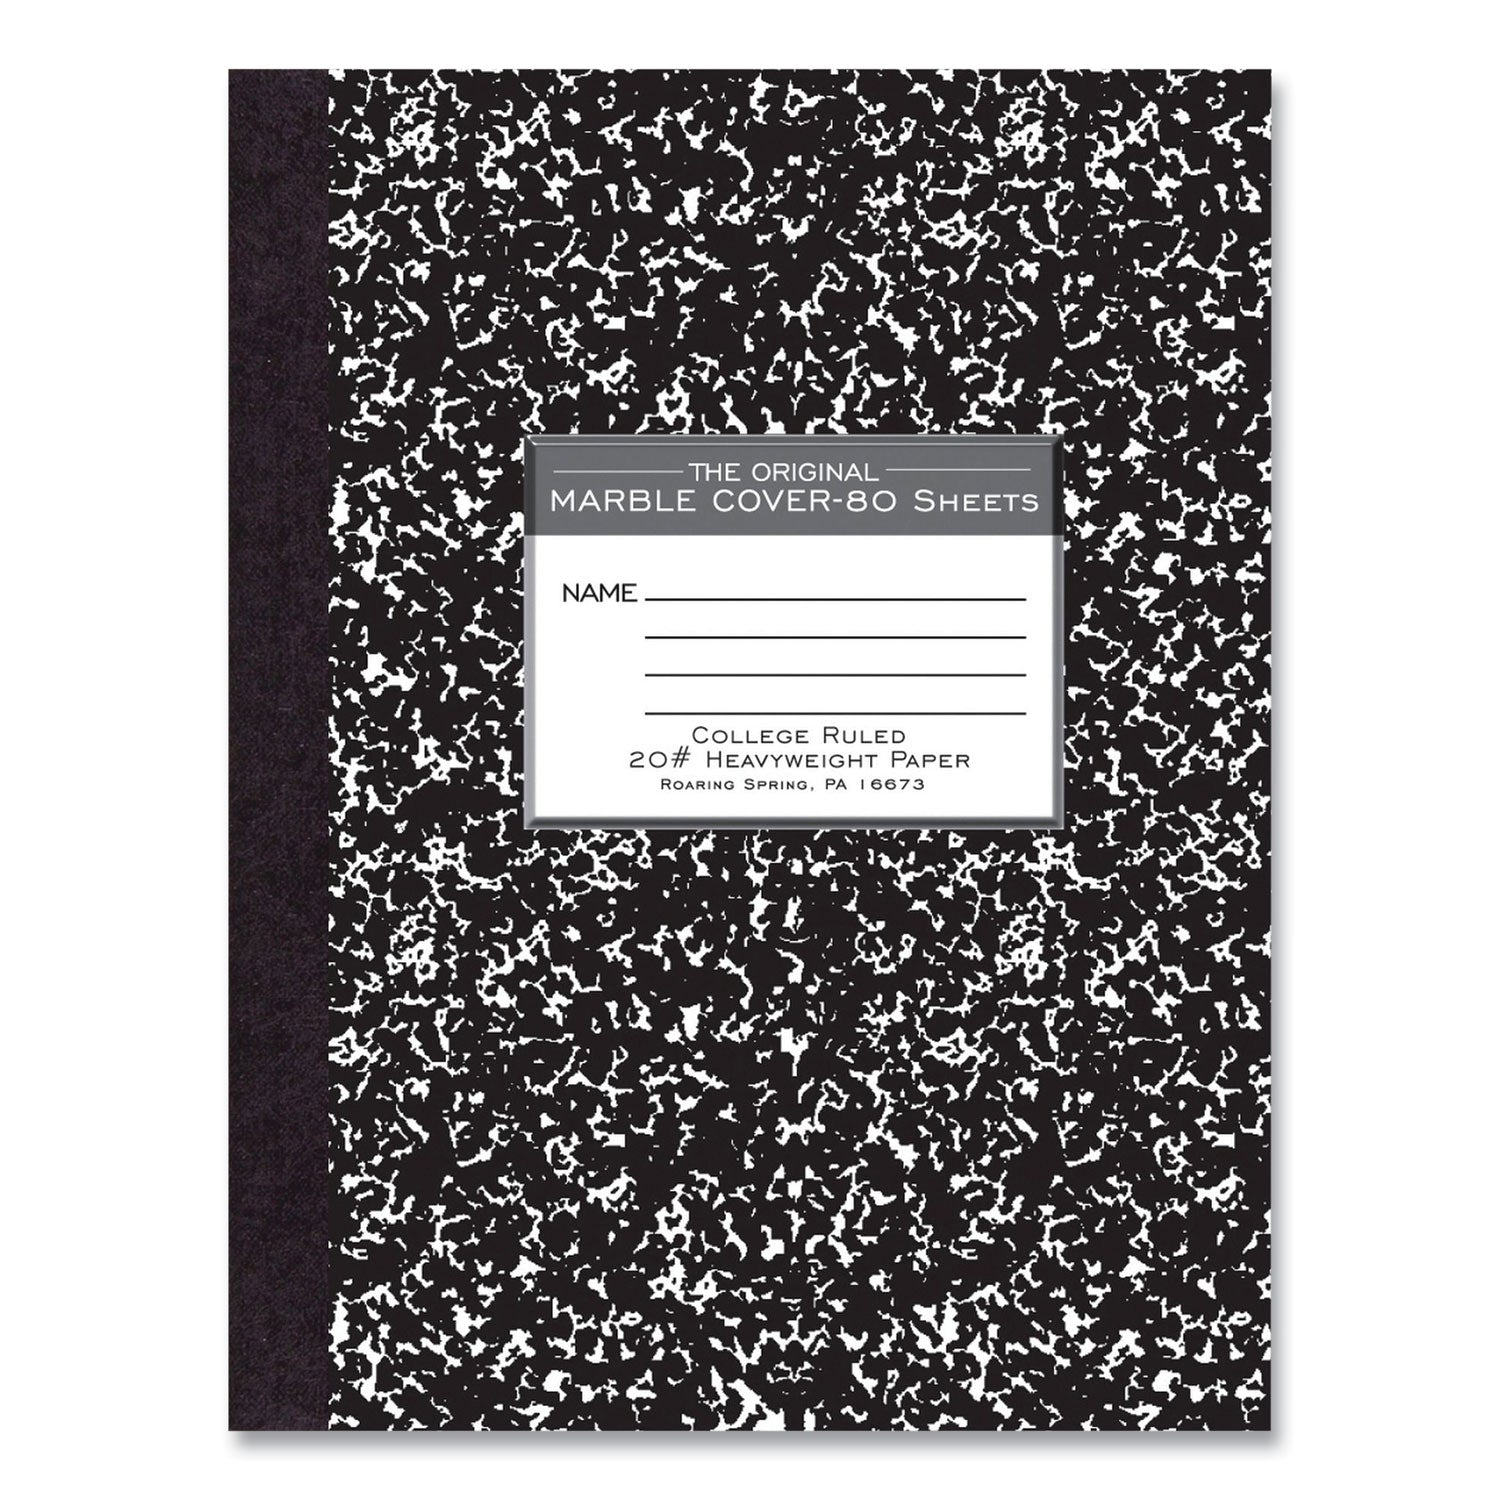 hardcover-composition-book-med-college-rule-black-marble-cover-80-1025-x-788-sheet-24-ct-ships-in-4-6-bus-days_roa77461cs - 2